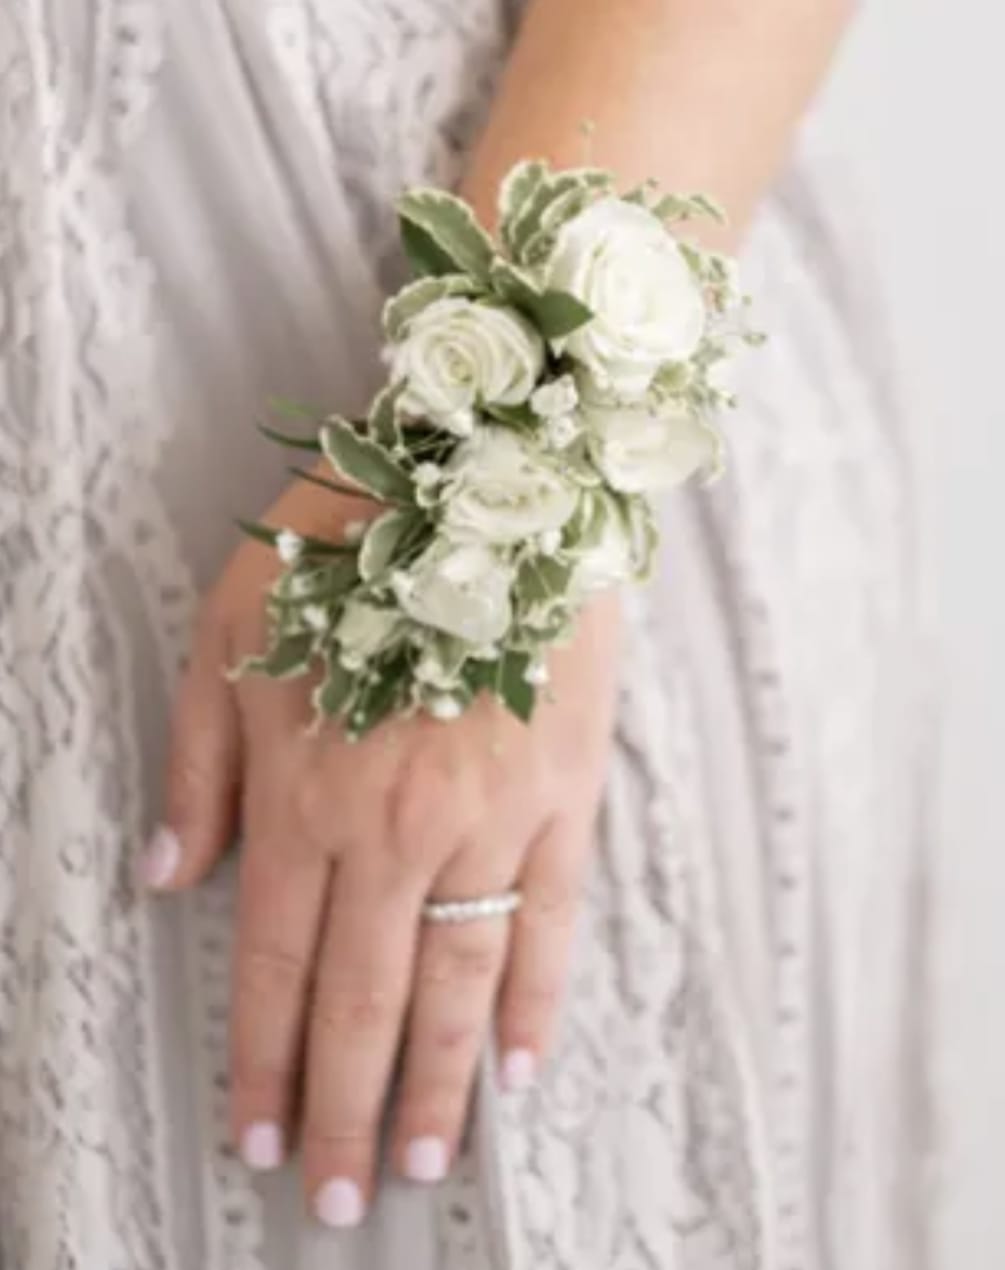 This traditional wrist corsage matches our traditional wedding package design using a